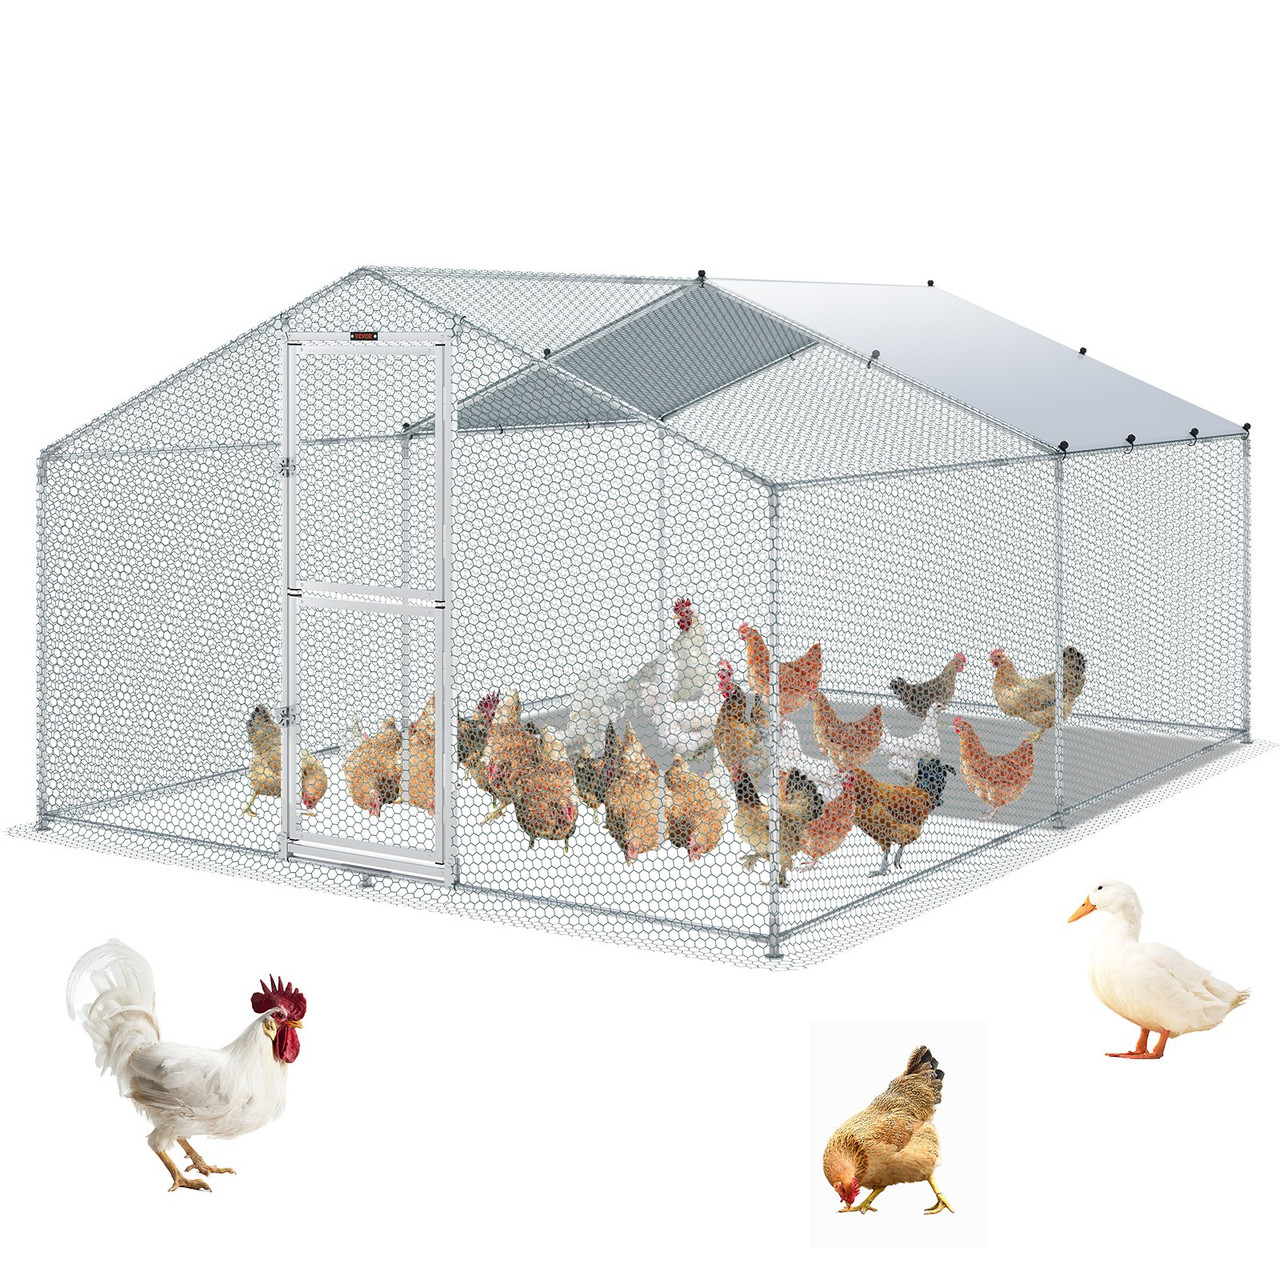 Metal Chicken Coop, 13.1 x 9.8 x 6.6 ft Large Chicken Run, Peaked Roof Outdoor Walk-in Poultry Pen Cage for Farm or Backyard, with Water-proof Cover and Protection Mesh, for Hen, Duck, Rabbit